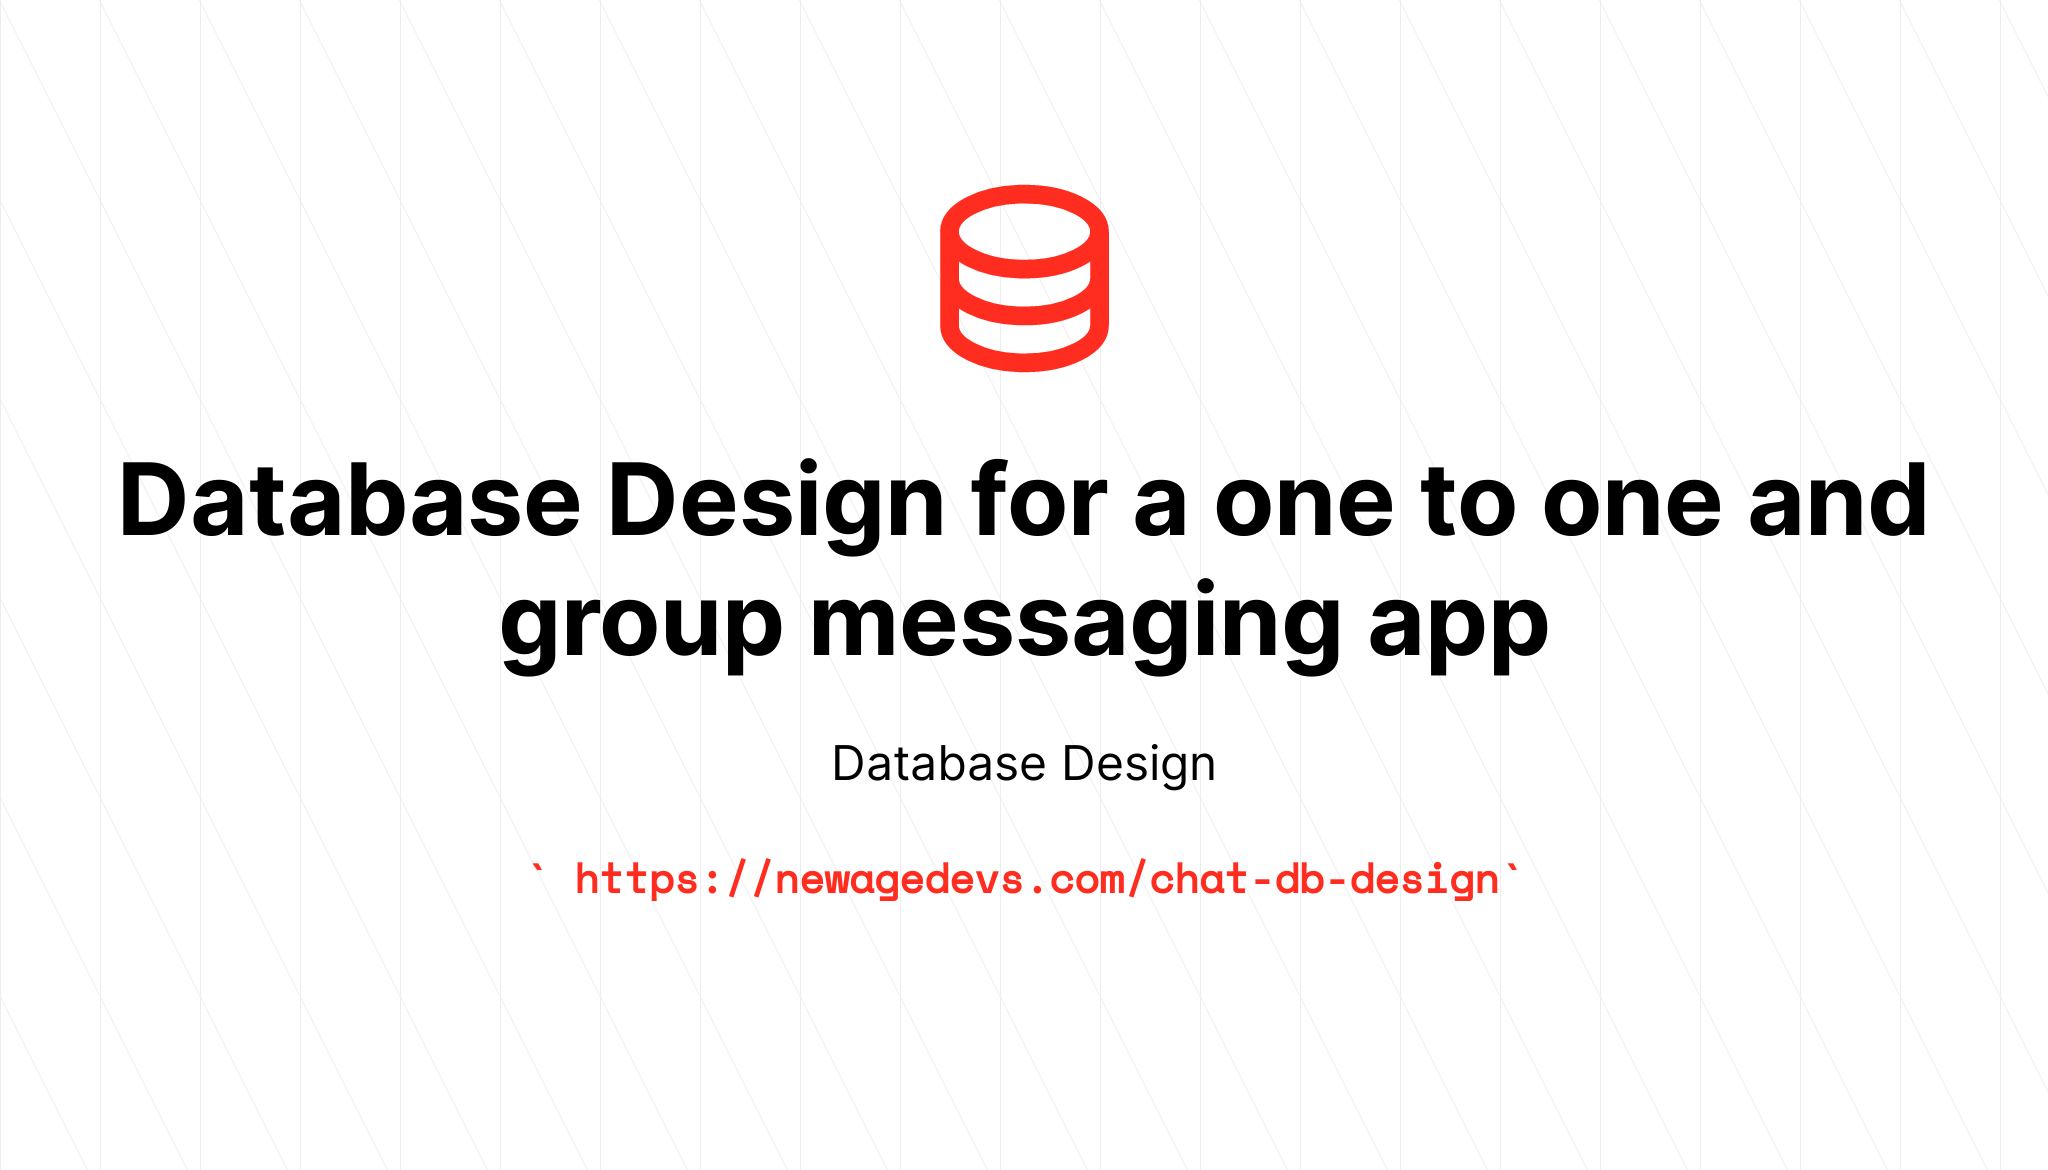 Database Design for a one to one and group messaging app